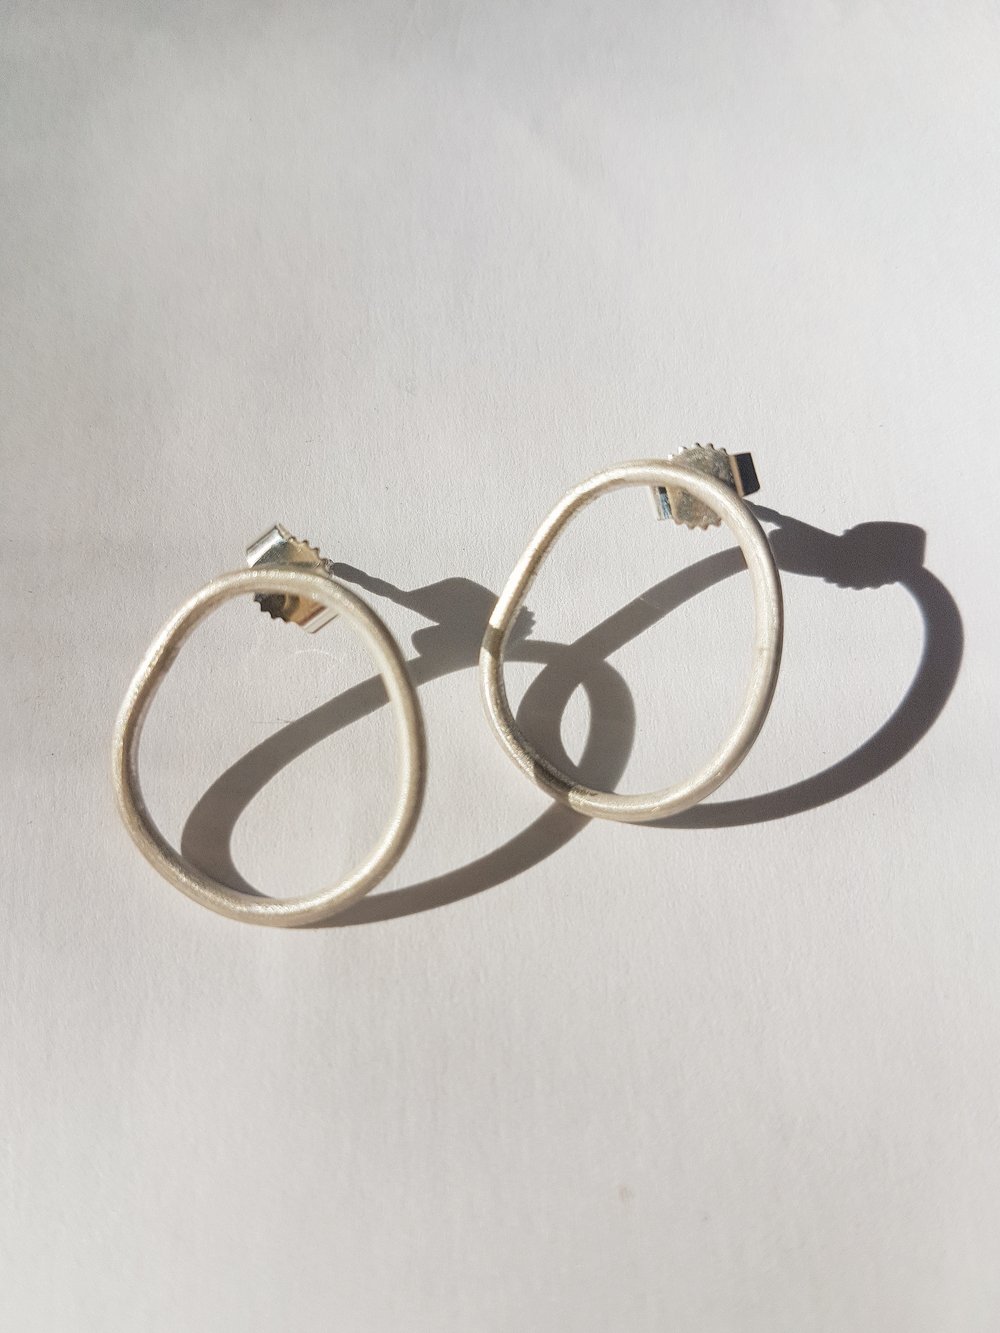 Image of Organic Shaped Silver Earrings (Roundish)